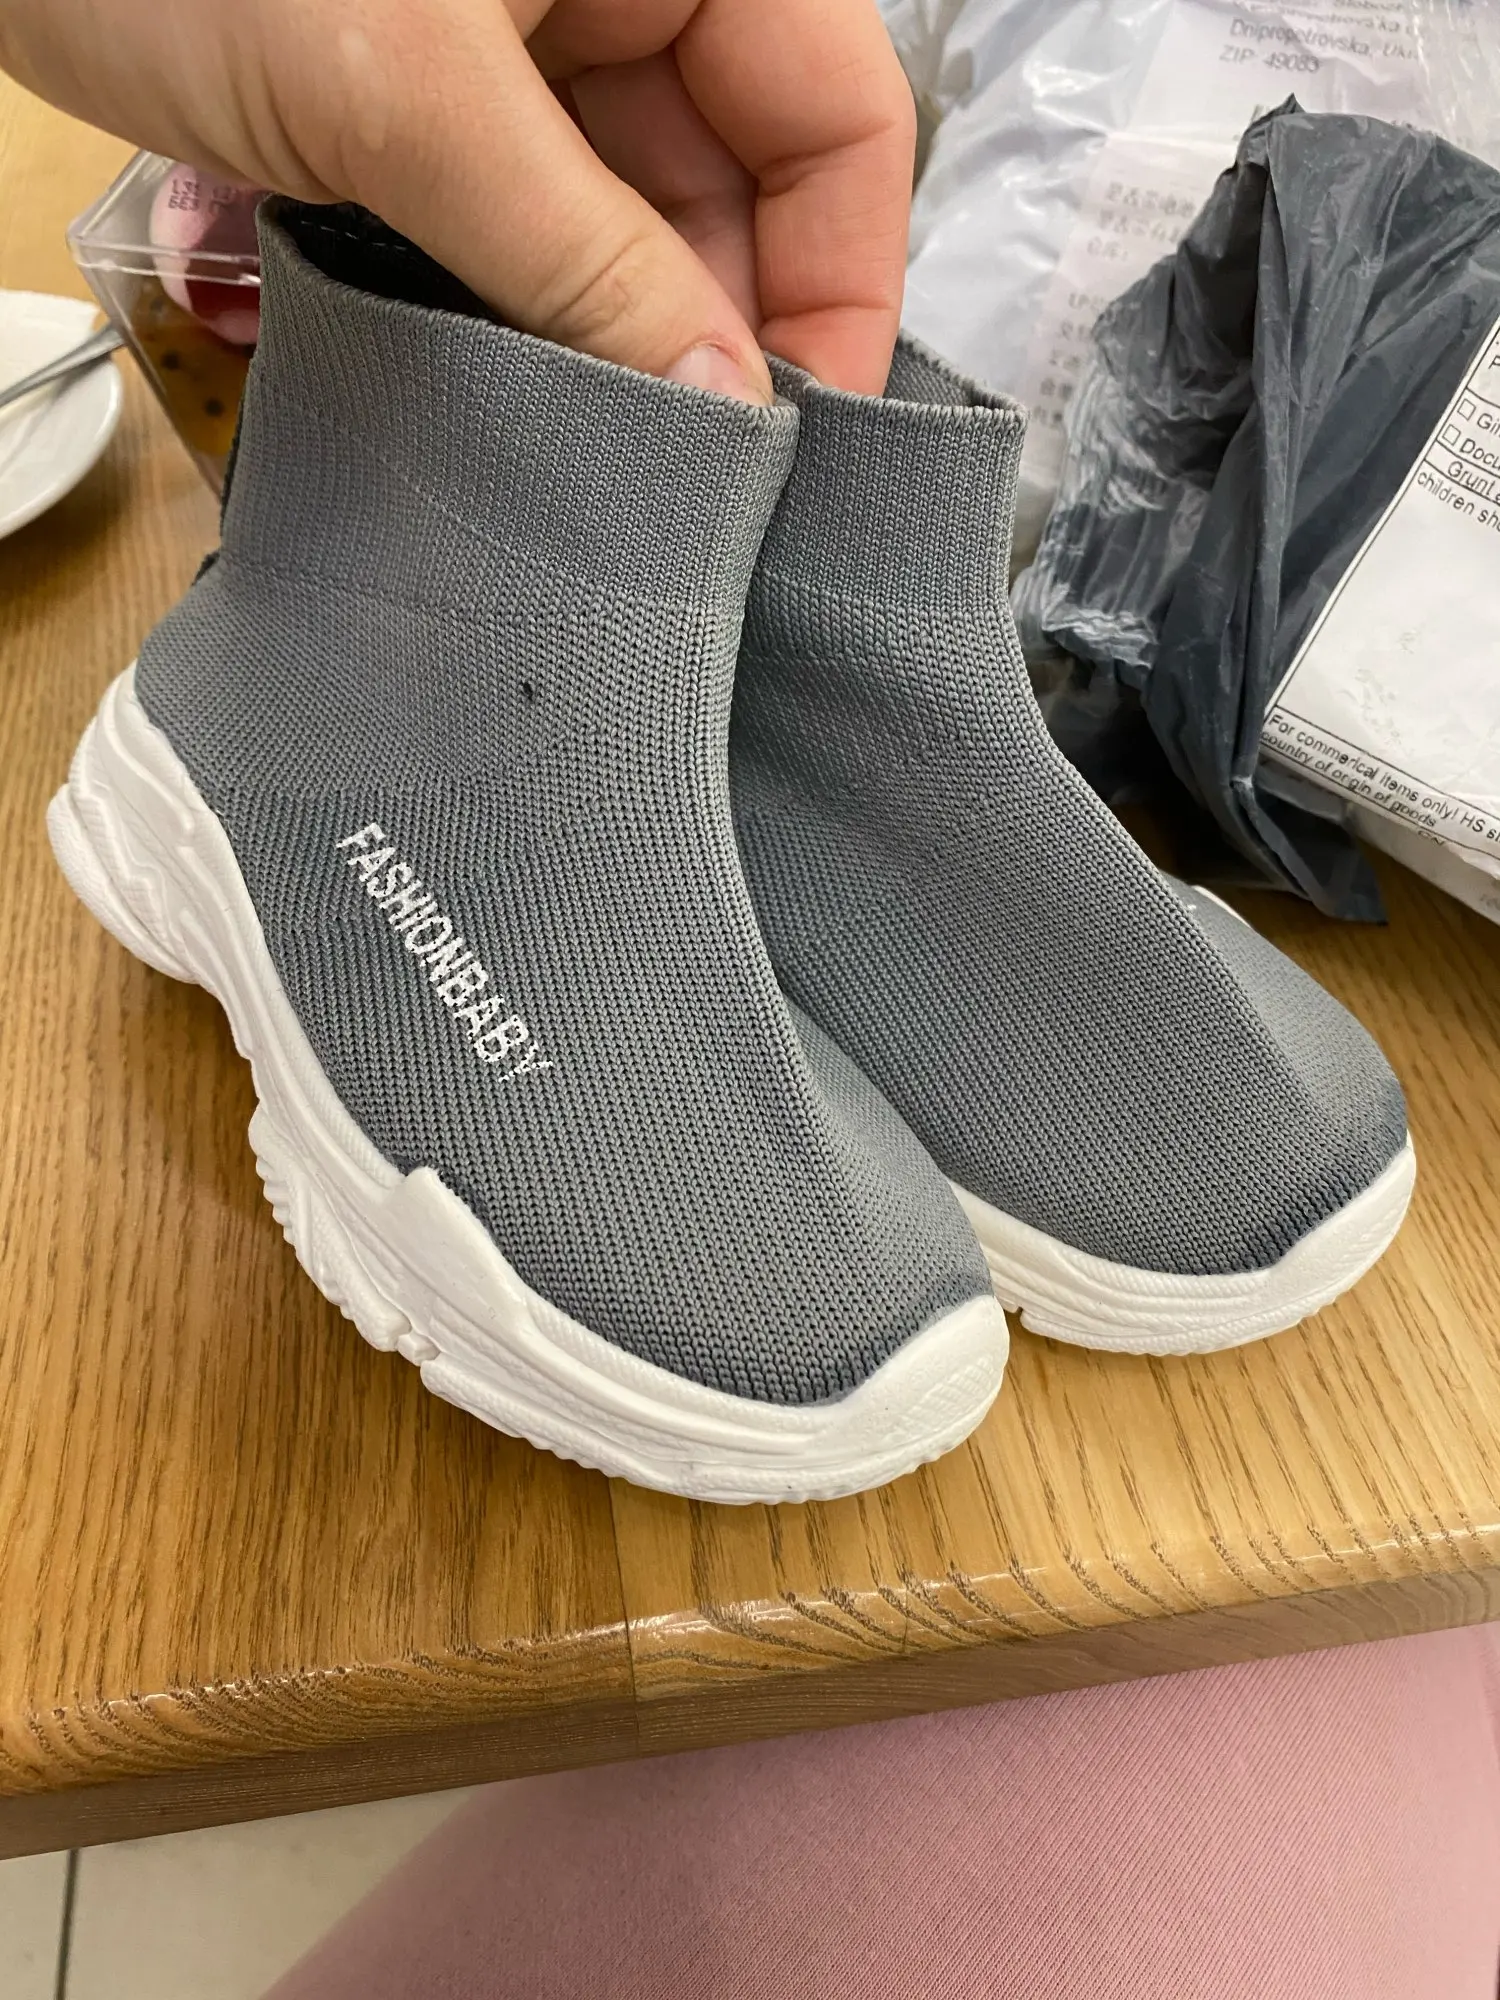 Autumn Winter Kids Sneakers Children Casual Shoes Slip-on Breathable Kids Socks Shoes Non-slip Snow Boots Boys Girls Sport Shoes photo review